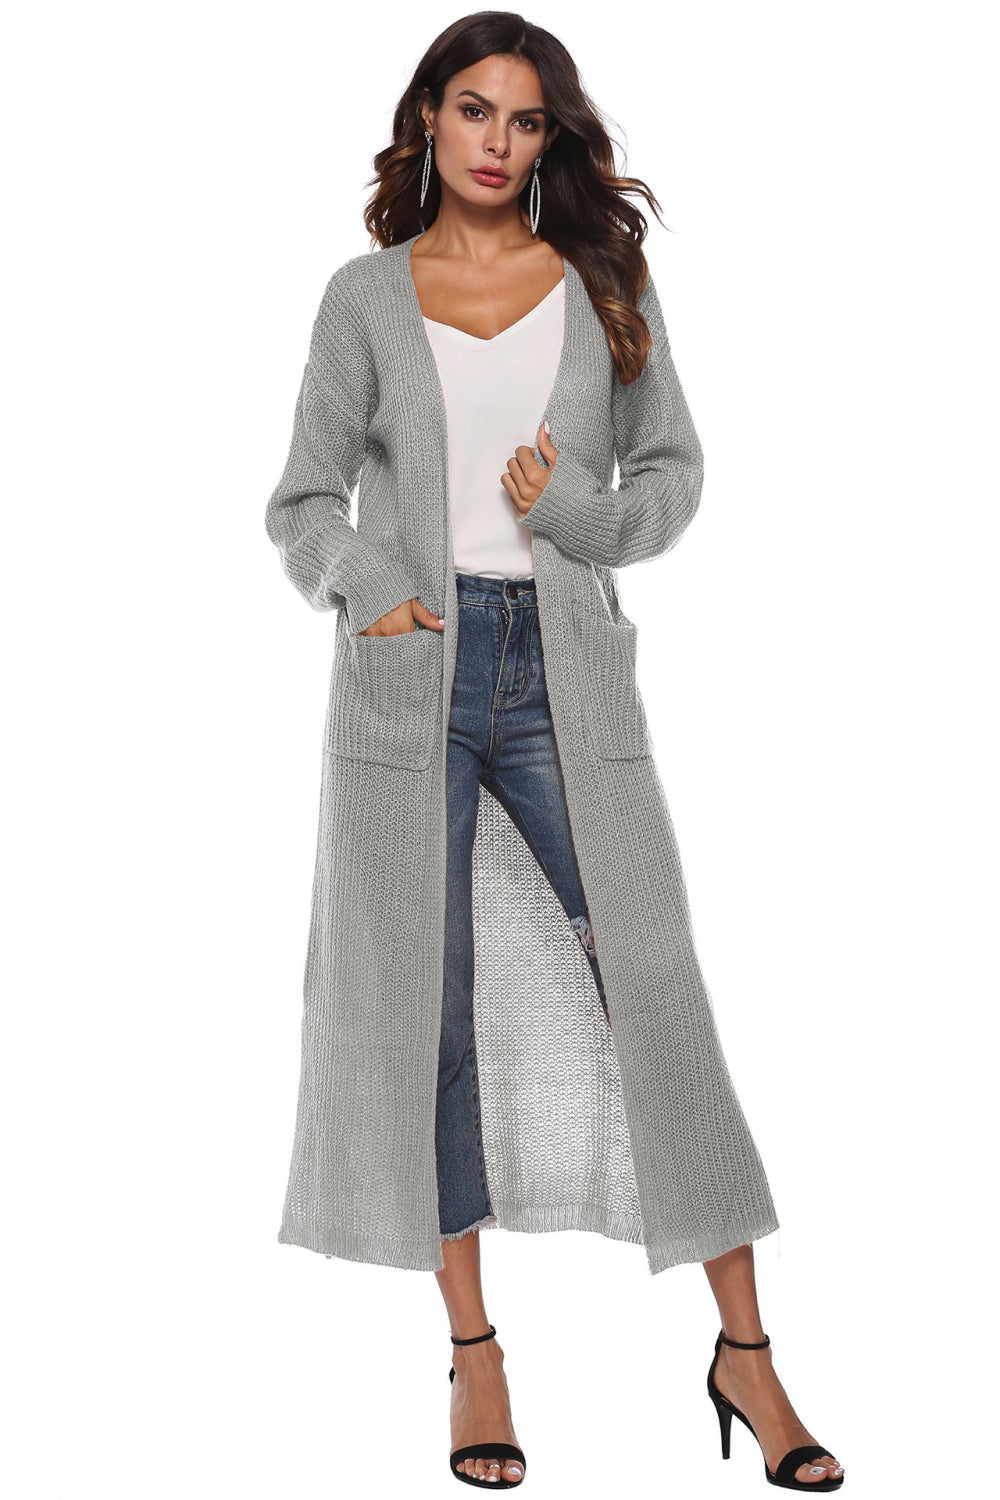 Long Sleeve Open Front Buttoned Cardigan - Light Gray / S - Women’s Clothing & Accessories - Shirts & Tops - 31 - 2024